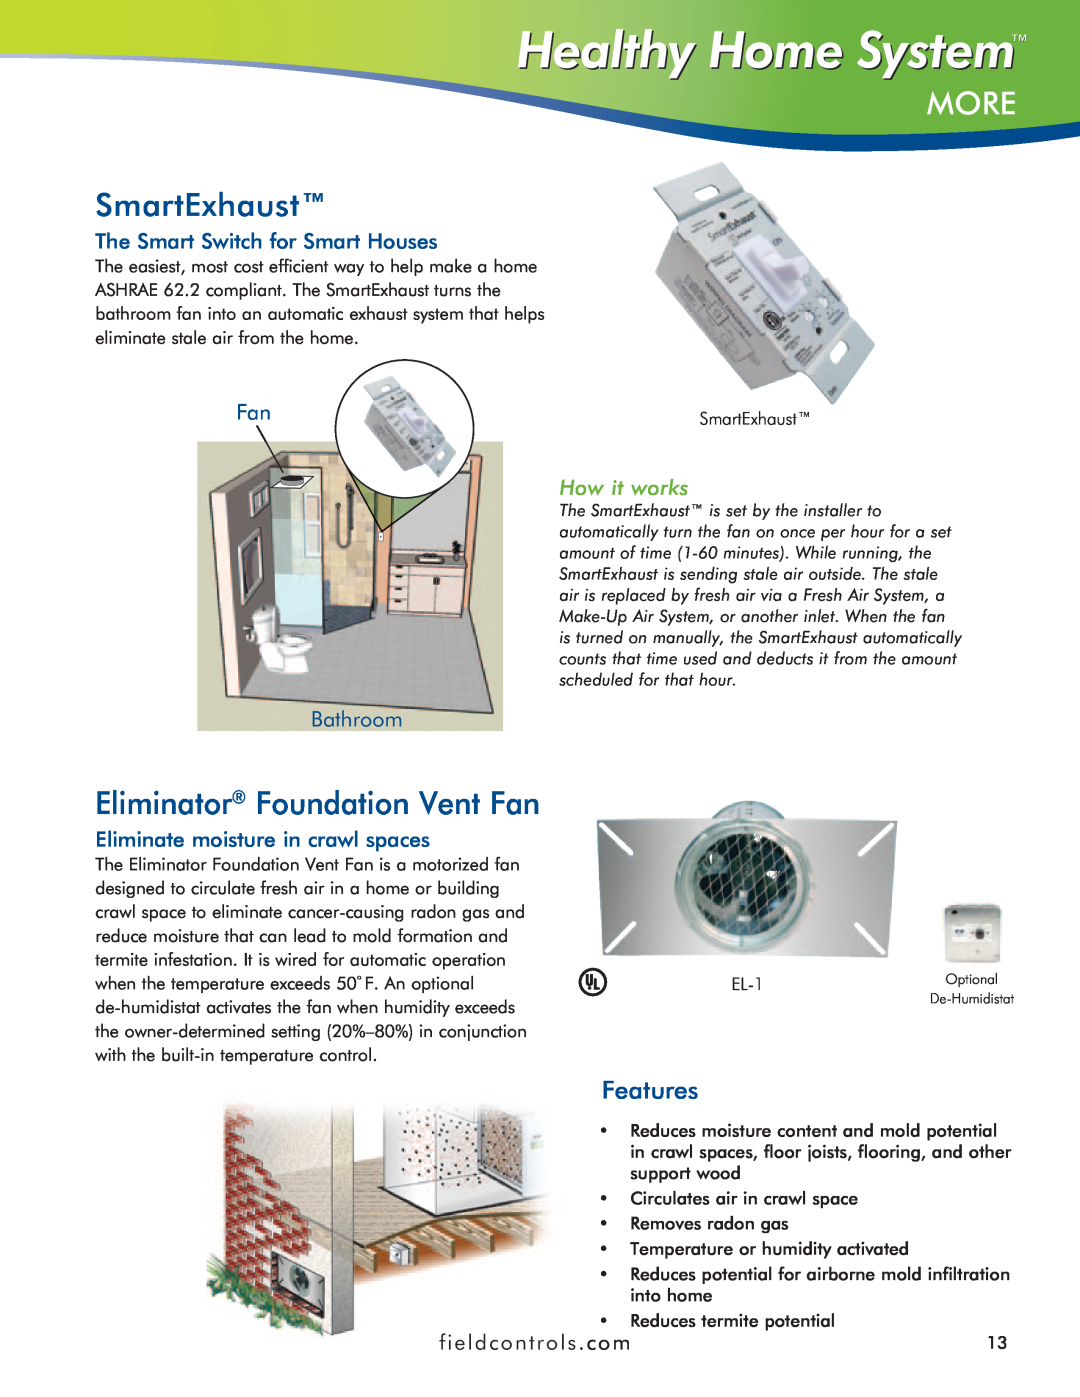 Field Controls IAQ11 manual More, SmartExhaust, Eliminator Foundation Vent Fan, The Smart Switch for Smart Houses, Bathroom 